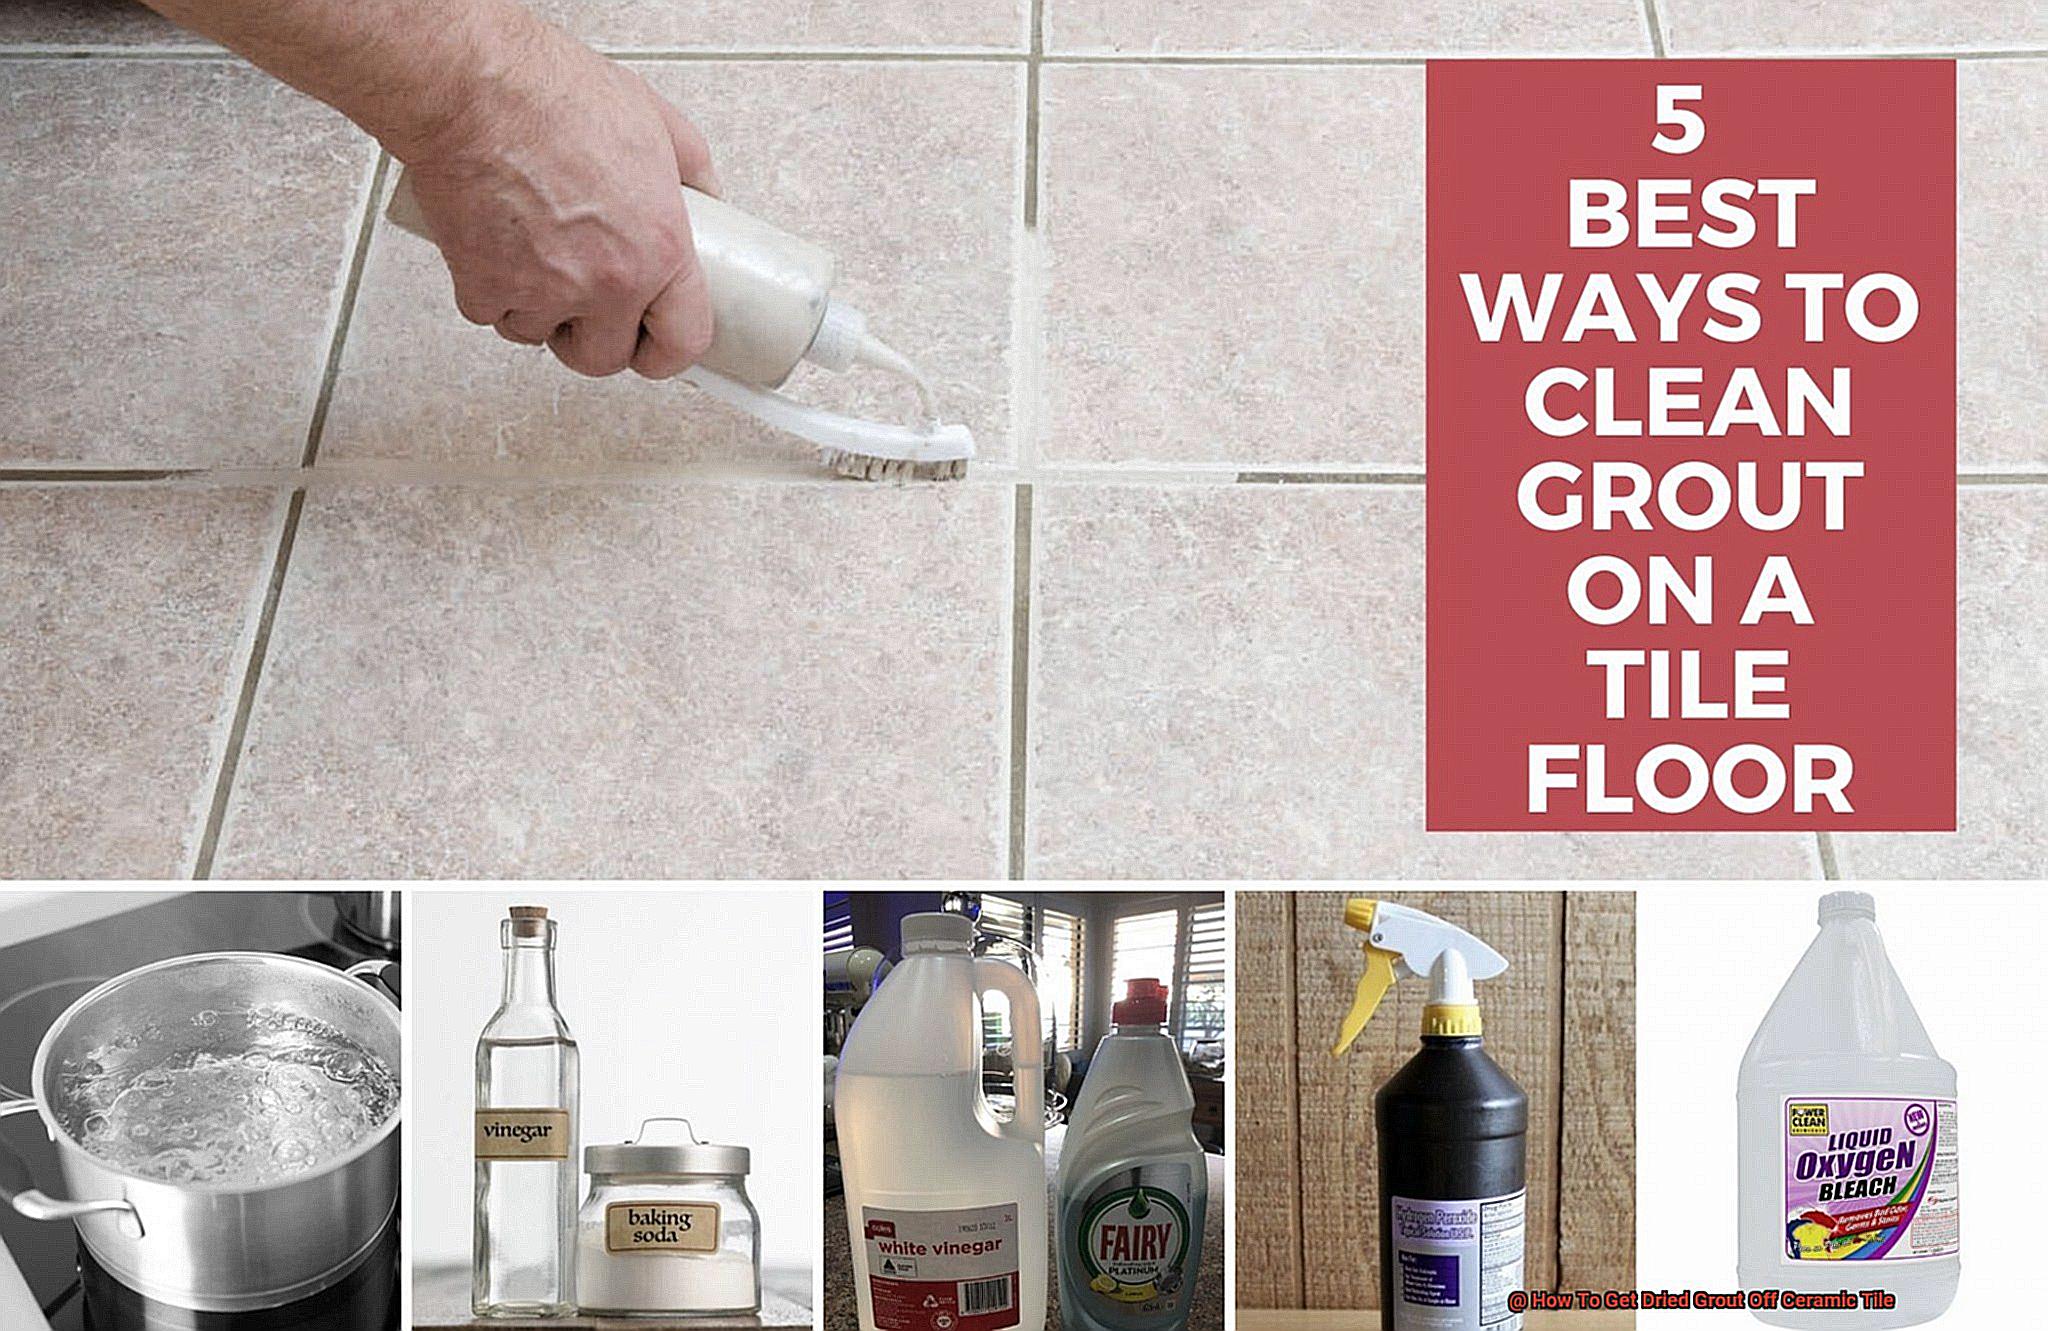 How To Get Dried Grout Off Ceramic Tile-4